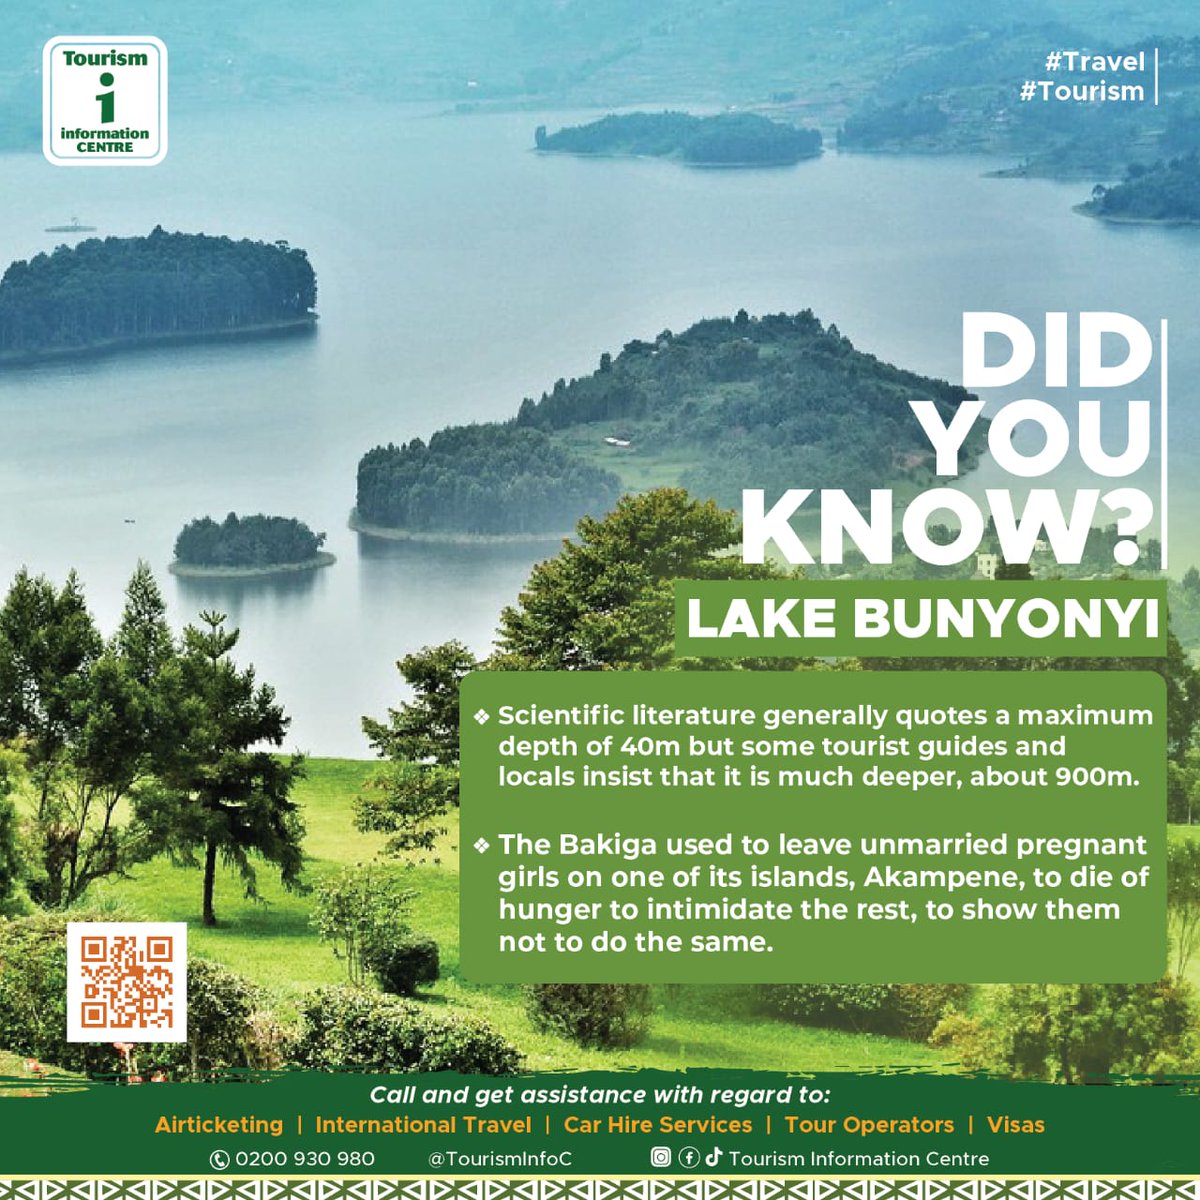 Today's Did You Know with @TourismInfoC features the well-known Lake Bunyonyi. #tourism #travel